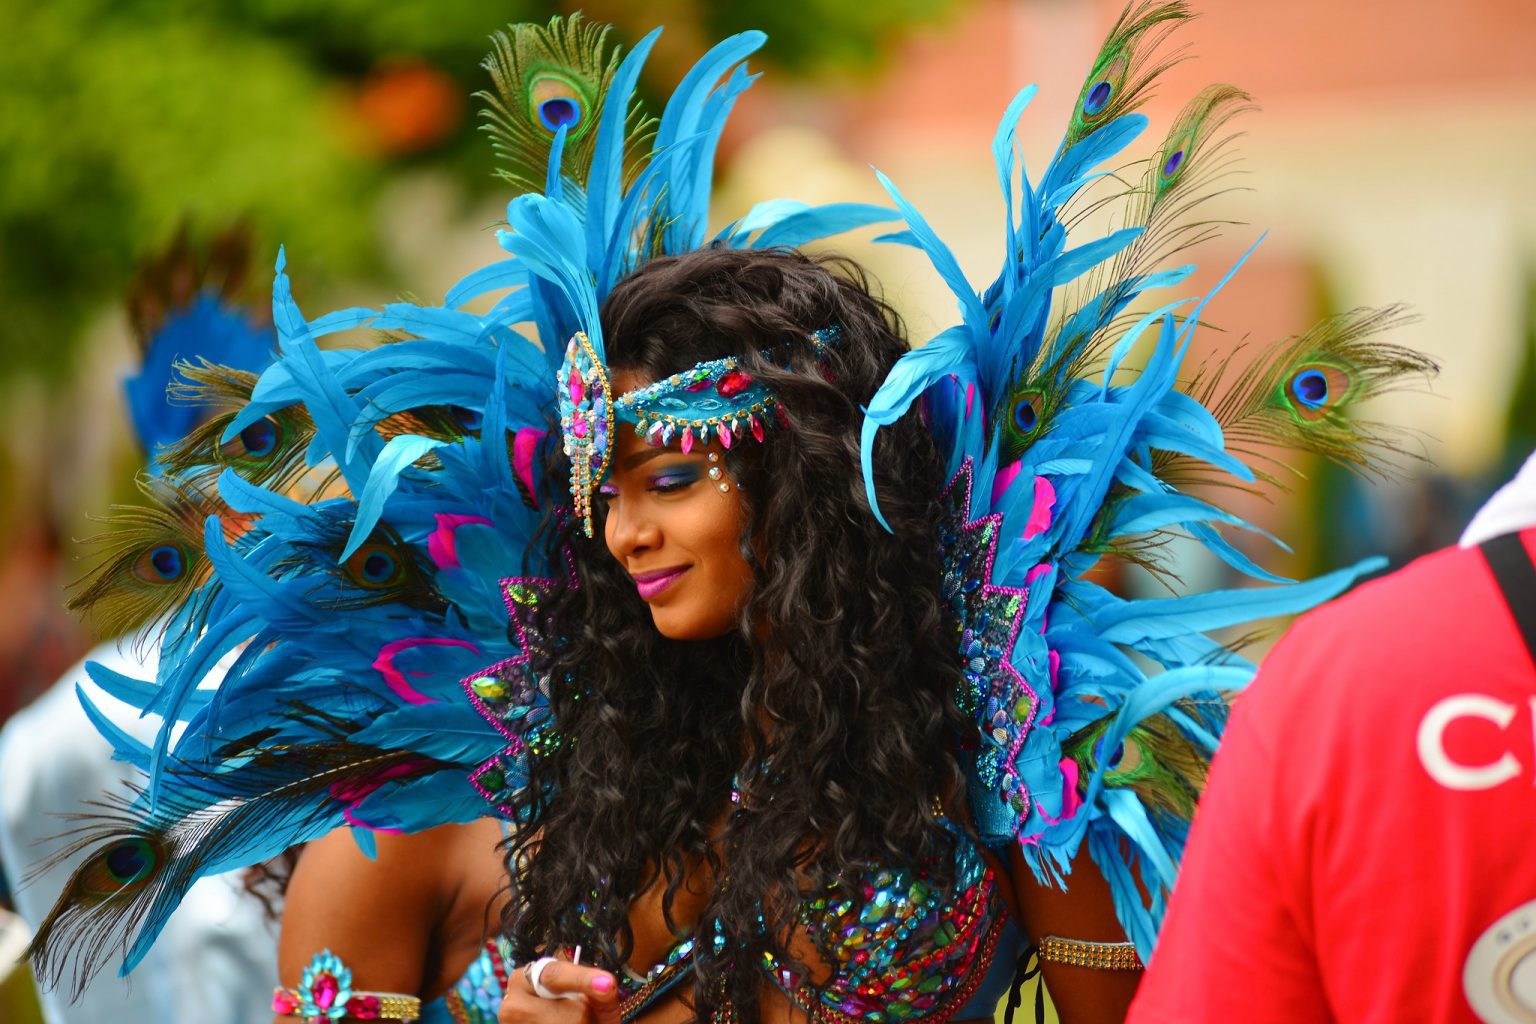 This year’s Toronto Caribbean Carnival has been cancelled due to the